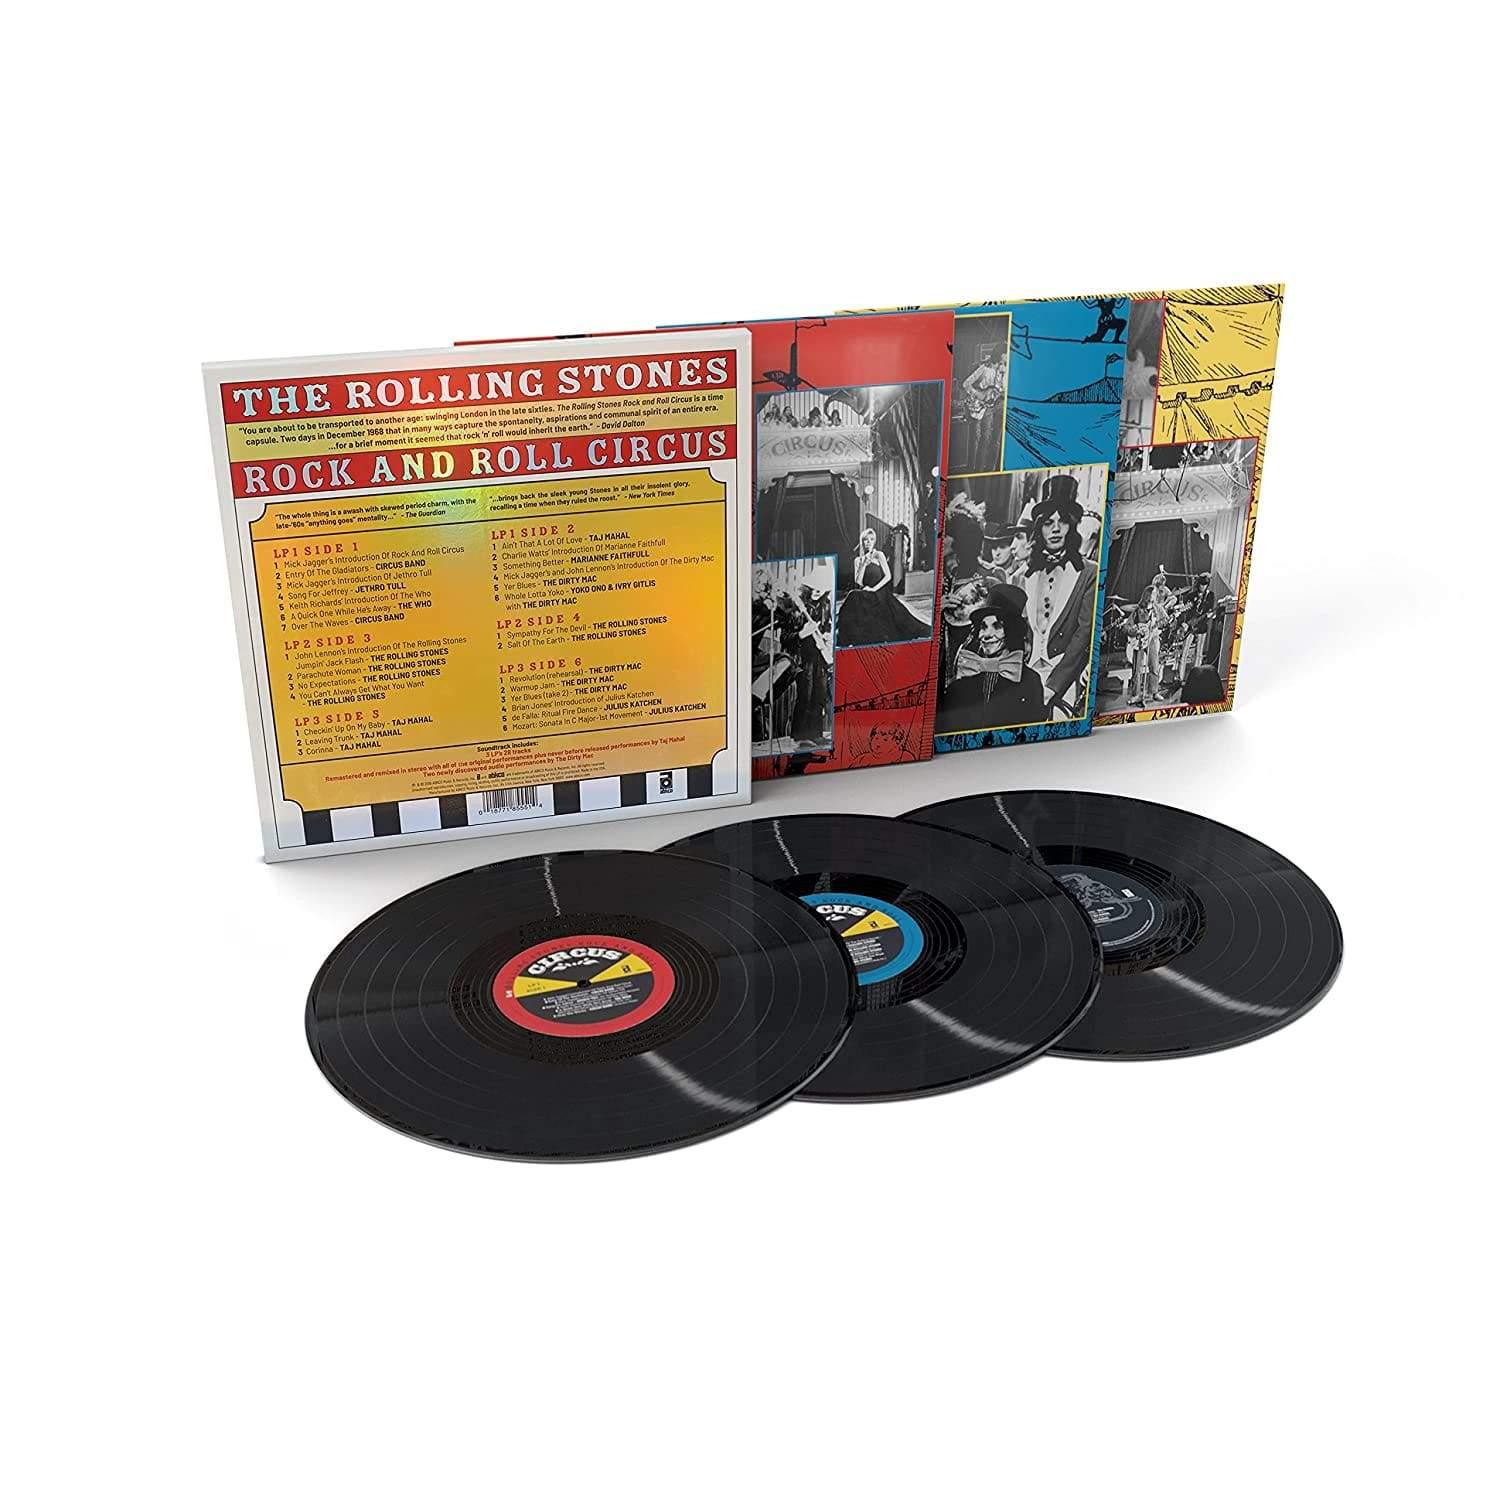 The Rolling Stones - The Rock and Roll Circus (Limited Edition, Remastered, 180 Gram) (3 LP) - Joco Records